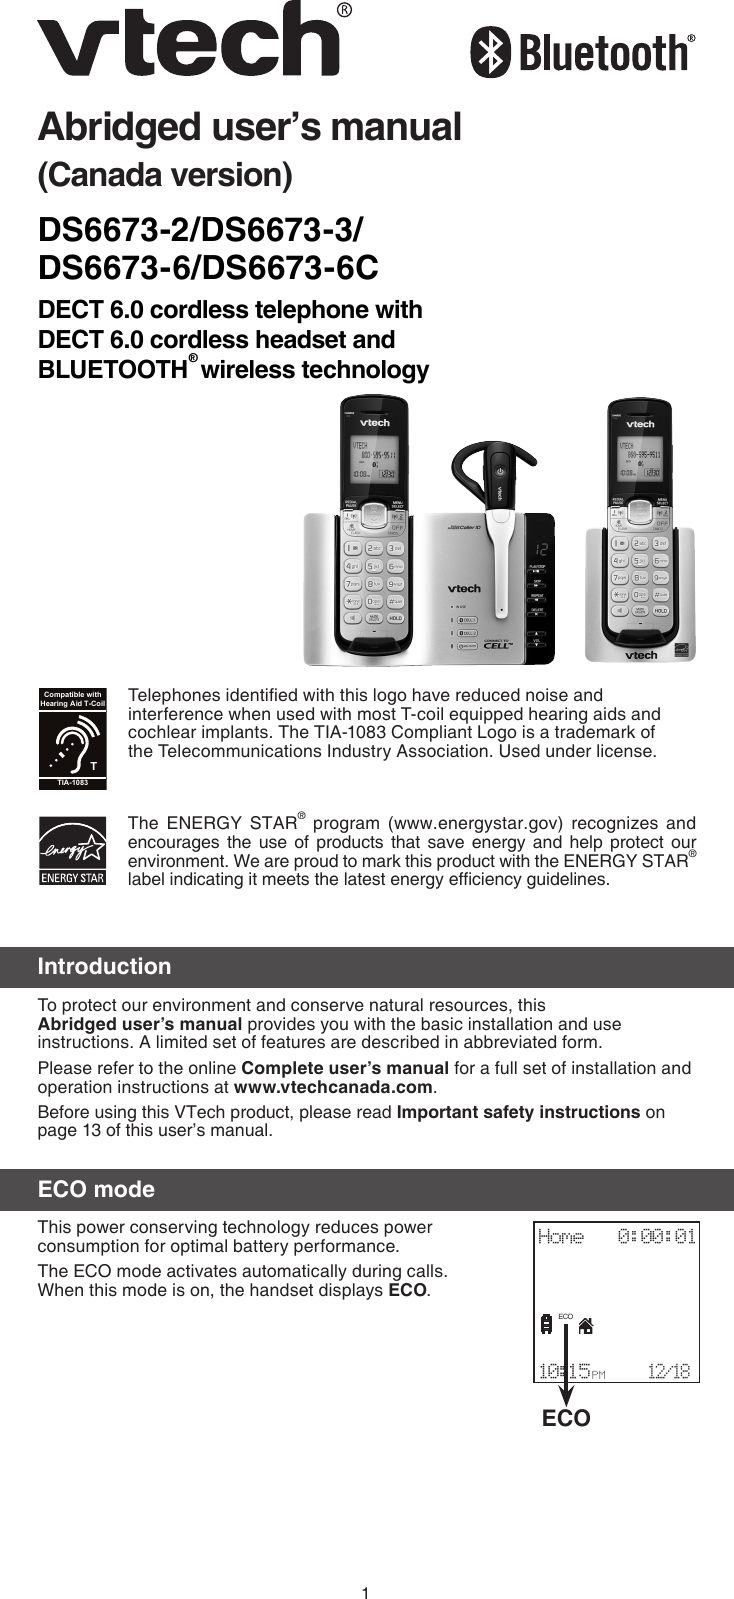 1DS6673-2/DS6673-3/ DS6673-6/DS6673-6CDECT 6.0 cordless telephone with  DECT 6.0 cordless headset and BLUETOOTH® wireless technologyAbridged user’s manual(Canada version)IntroductionTo protect our environment and conserve natural resources, this Abridged user’s manual provides you with the basic installation and use instructions. A limited set of features are described in abbreviated form.Please refer to the online Complete user’s manual for a full set of installation and operation instructions at www.vtechcanada.com.Before using this VTech product, please read Important safety instructions on page 13 of this user’s manual.ECO modeThis power conserving technology reduces power consumption for optimal battery performance. The ECO mode activates automatically during calls.  When this mode is on, the handset displays ECO.The  ENERGY  STAR®  program  (www.energystar.gov)  recognizes  and encourages  the  use  of  products that  save  energy  and  help  protect  our environment. We are proud to mark this product with the ENERGY STAR® label indicating it meets the latest energy efciency guidelines.Telephones identied with this logo have reduced noise and interference when used with most T-coil equipped hearing aids and cochlear implants. The TIA-1083 Compliant Logo is a trademark of the Telecommunications Industry Association. Used under license.TCompatible withHearing Aid T-CoilTIA-1083ECOHome   0:00:01                         10:15 P M    12/18ECO